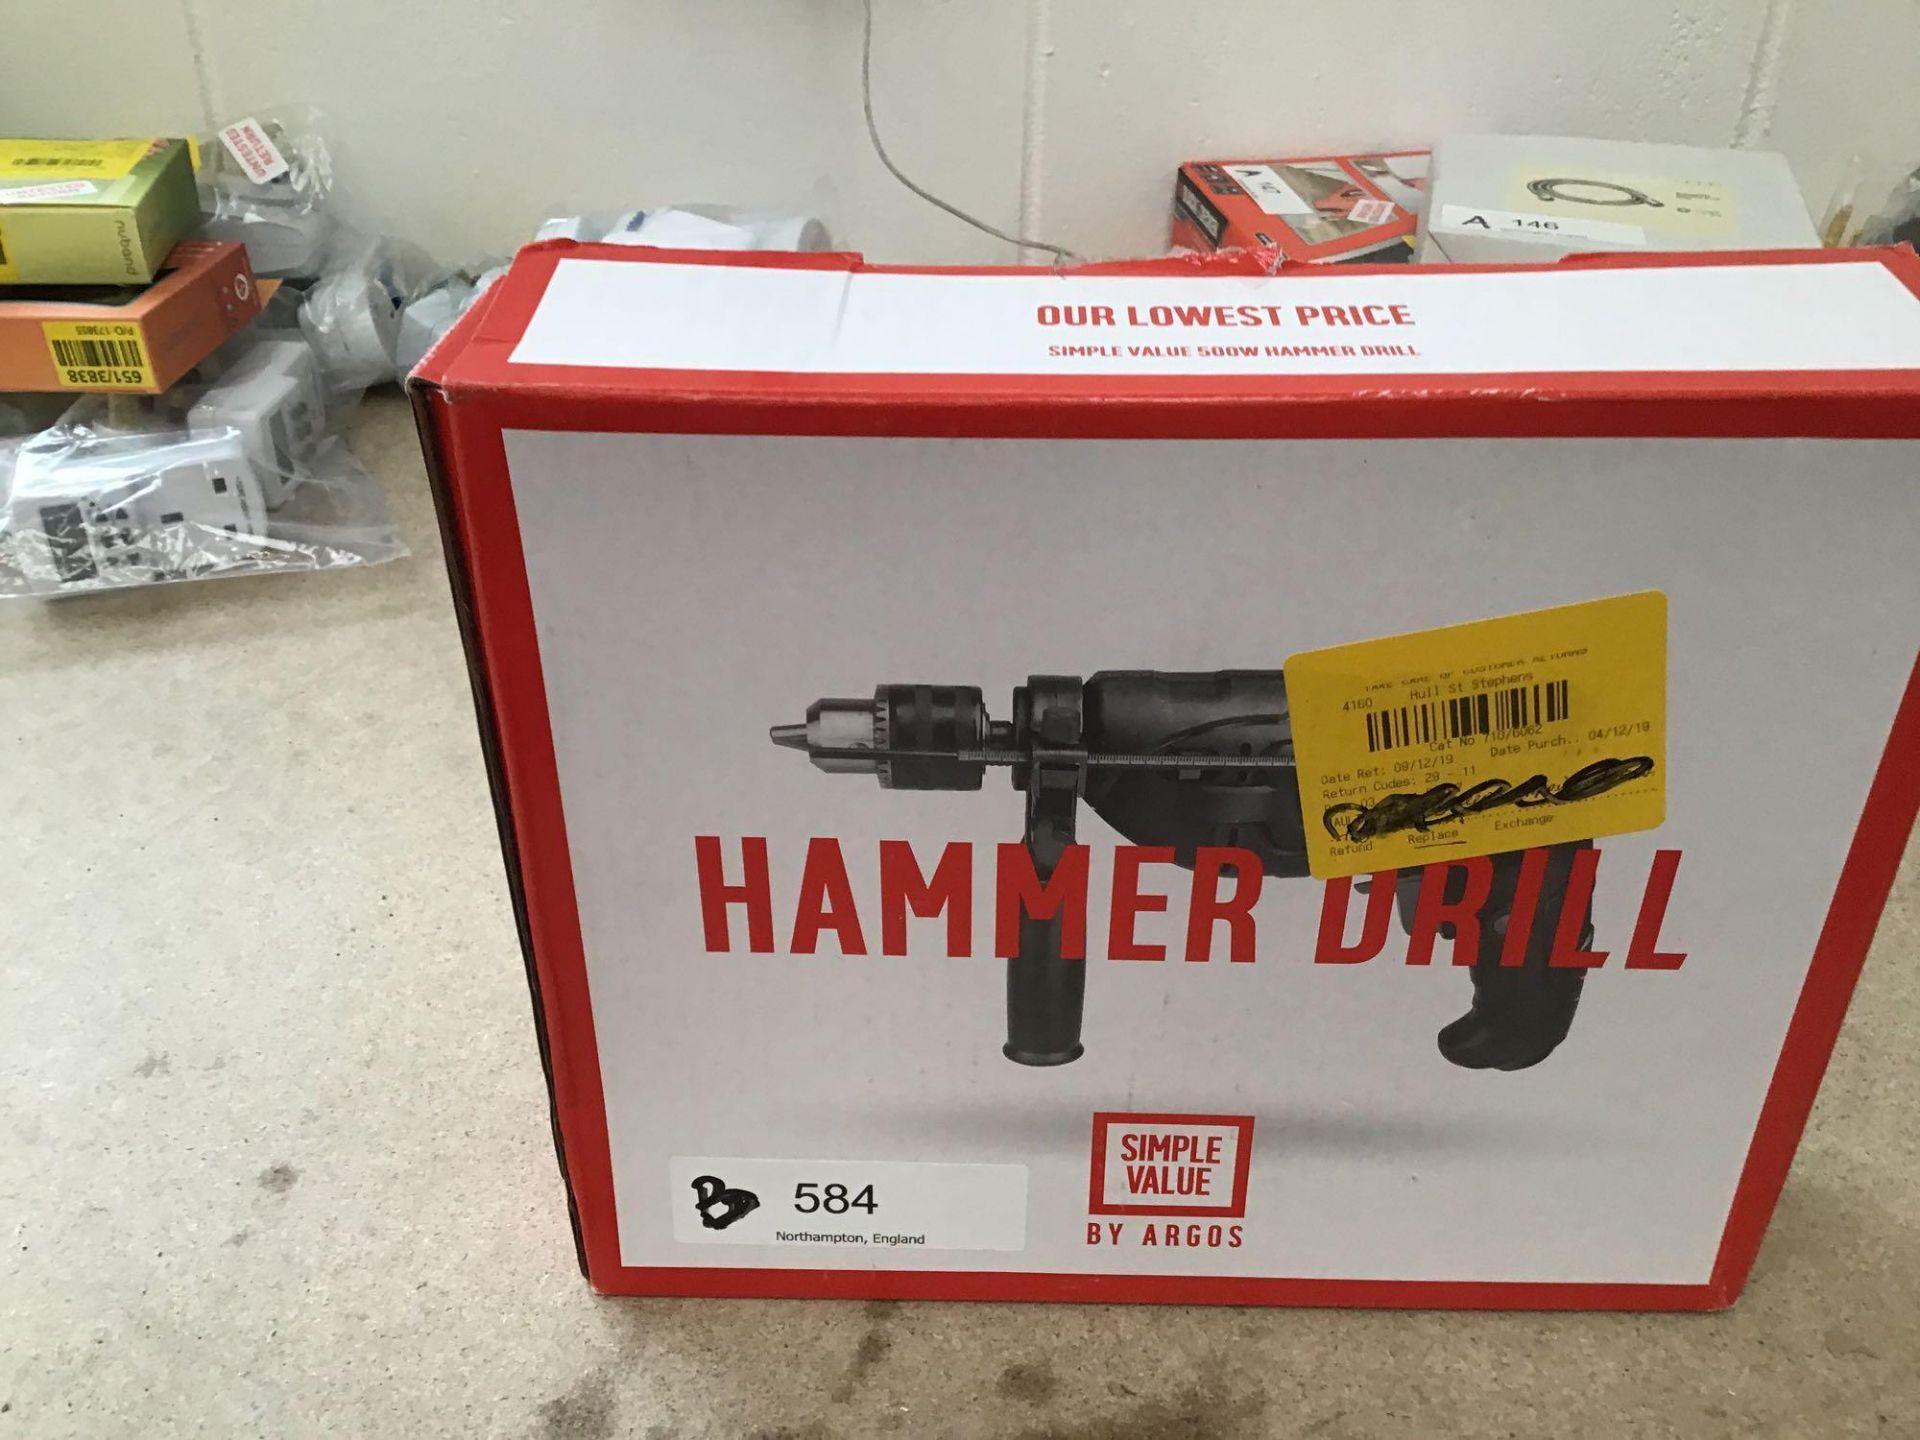 Simple Value Corded Hammer Drill - 500W - £15.00 RRP - Image 2 of 6